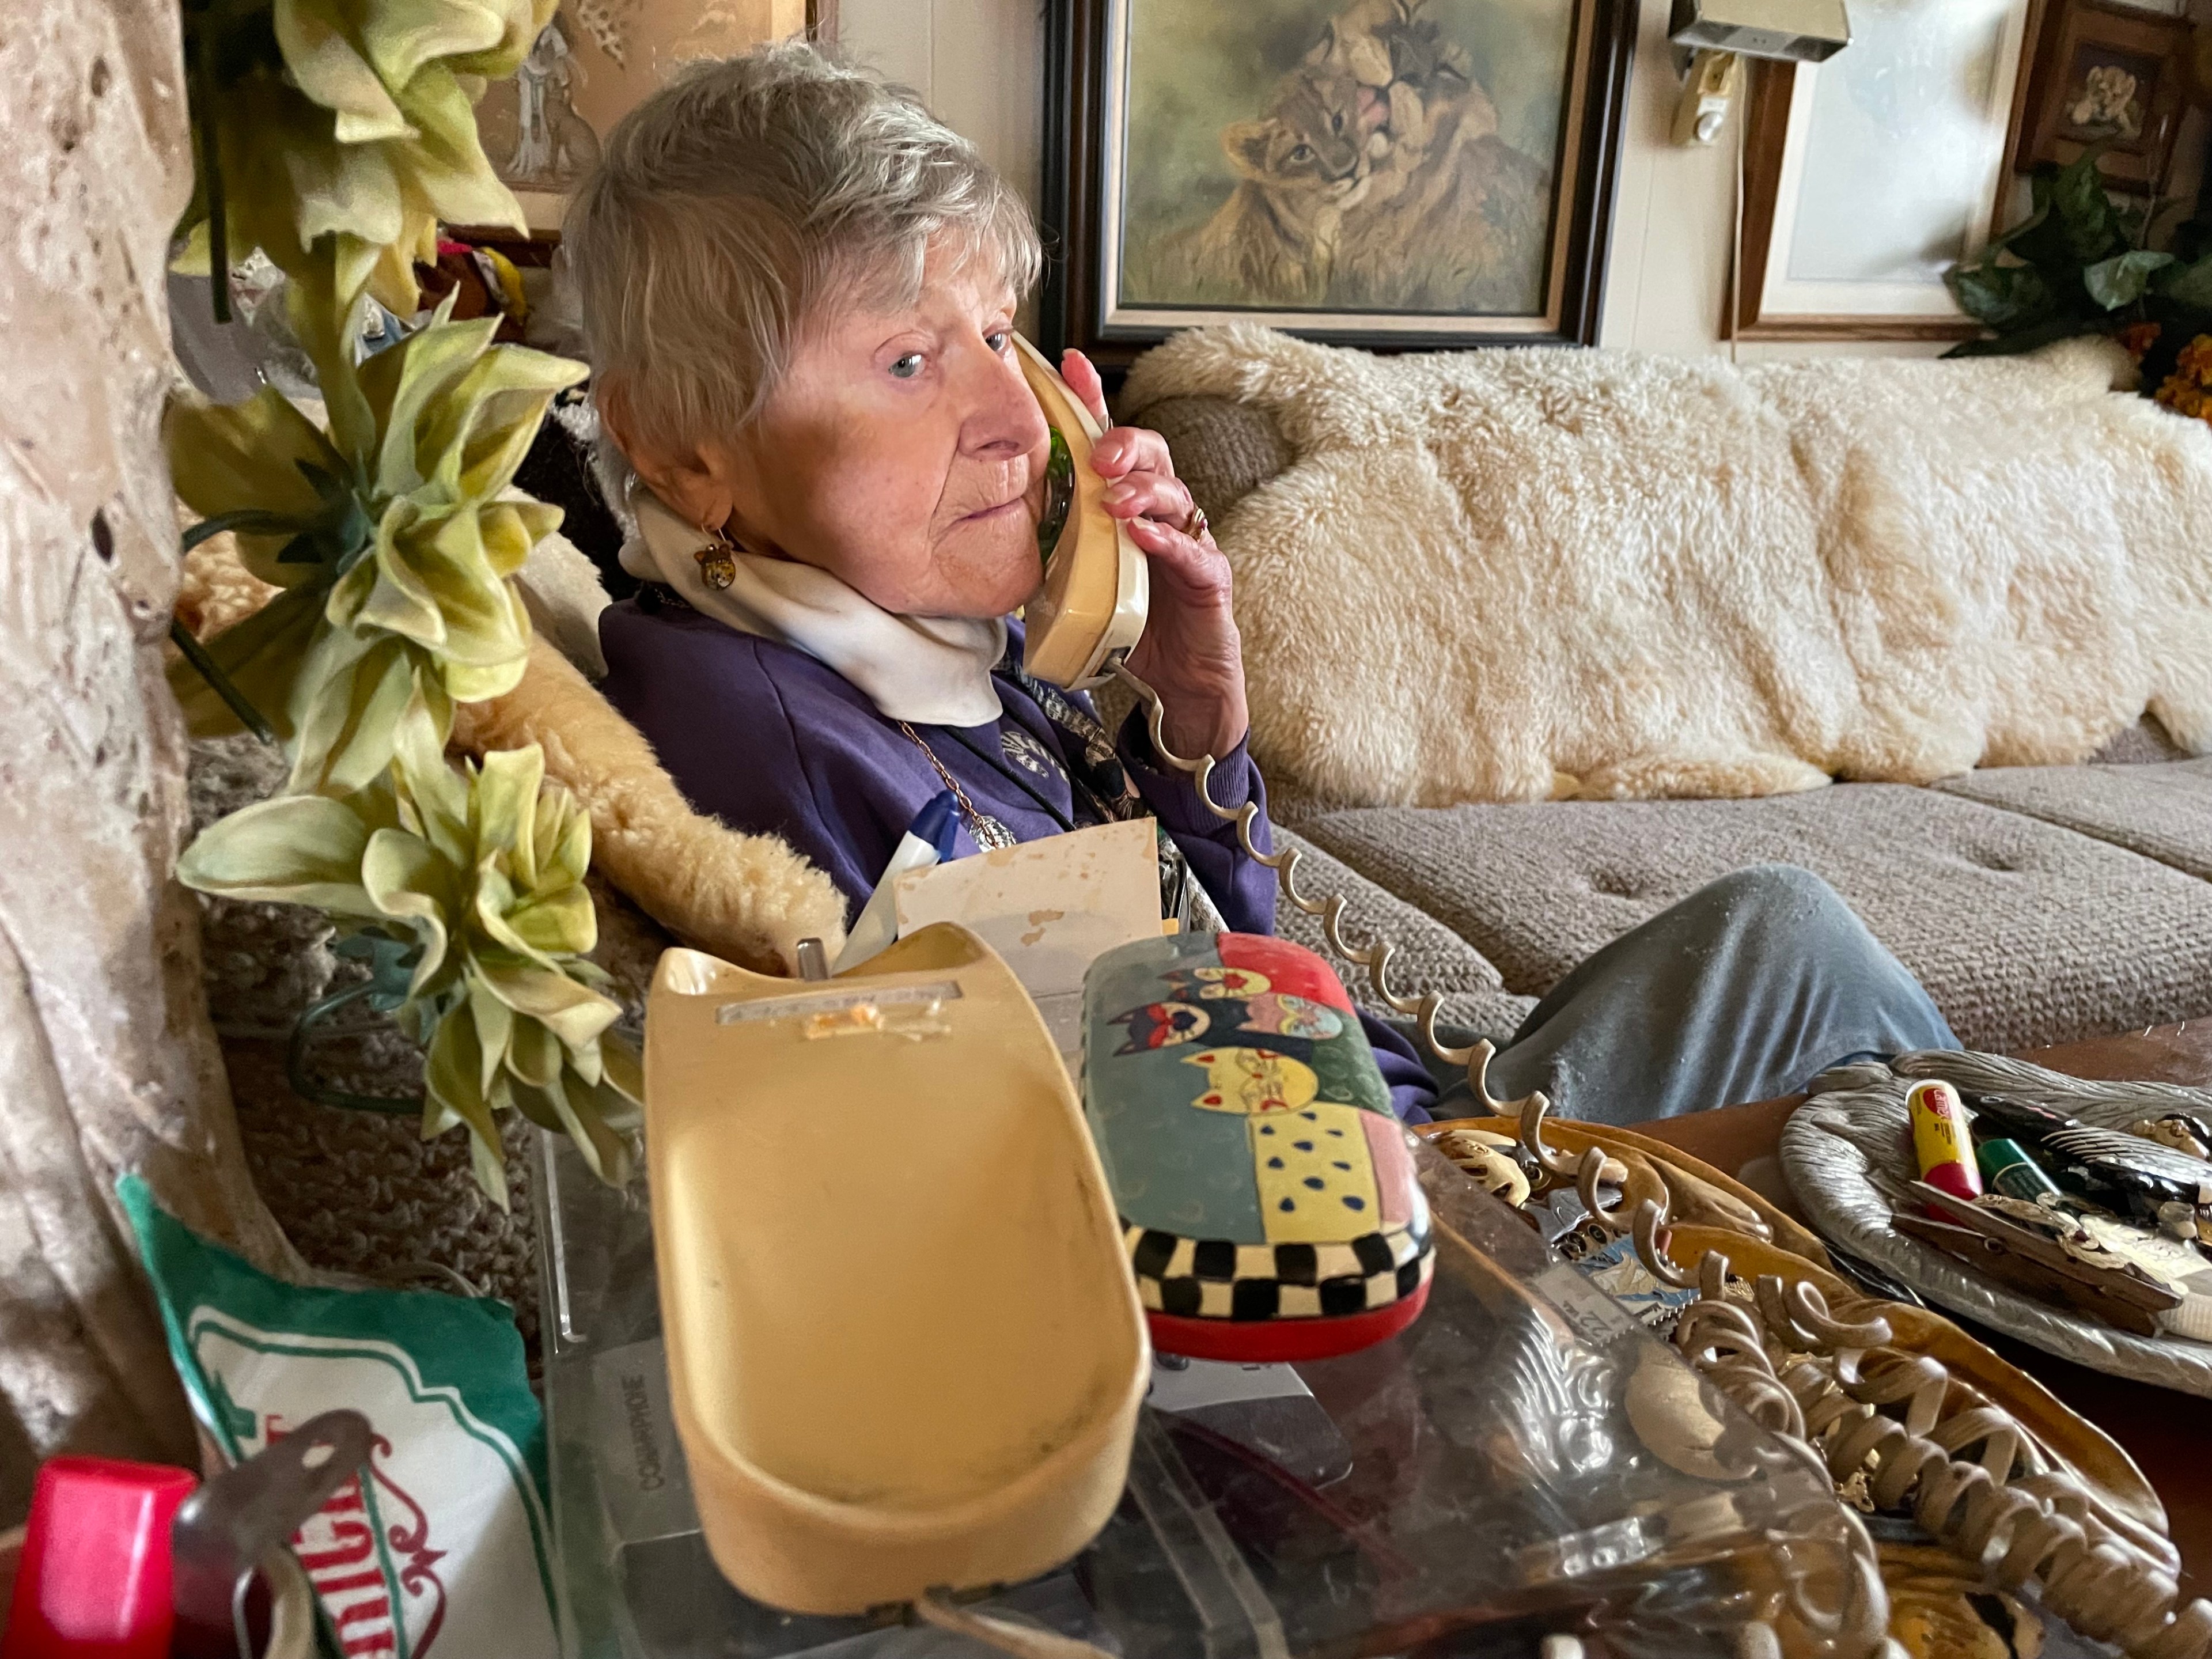 An old woman sits on a section sofa holding a corded landline telephone.